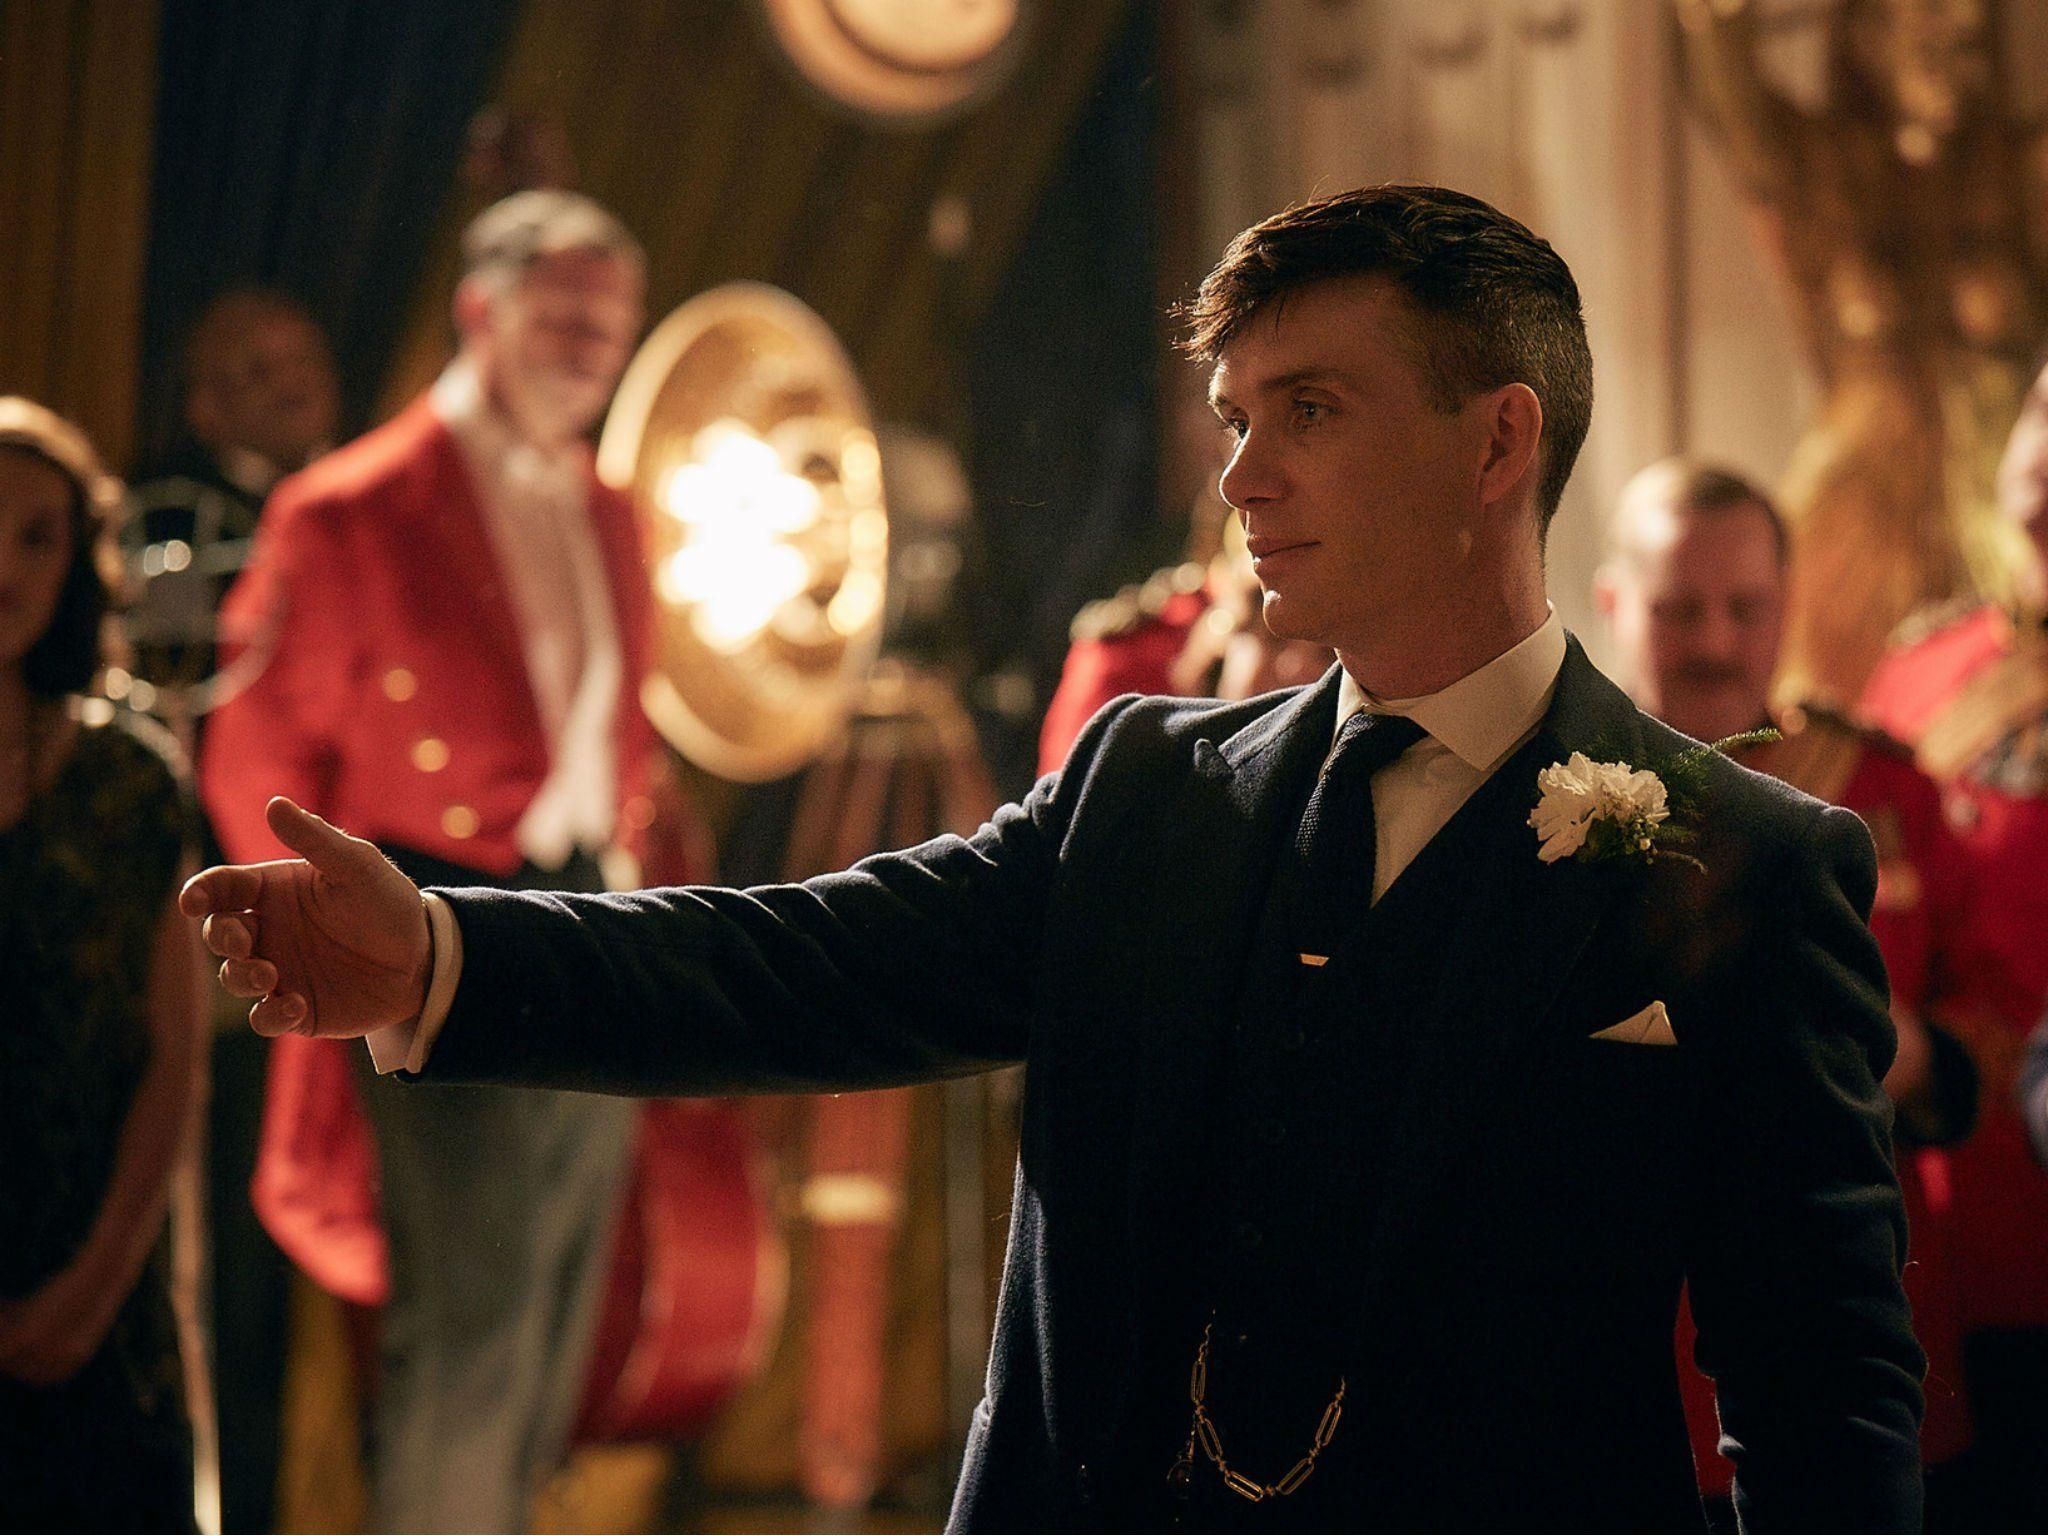 Peaky Blinders season 3: New photos released of Tommy Shelby's wedding day.